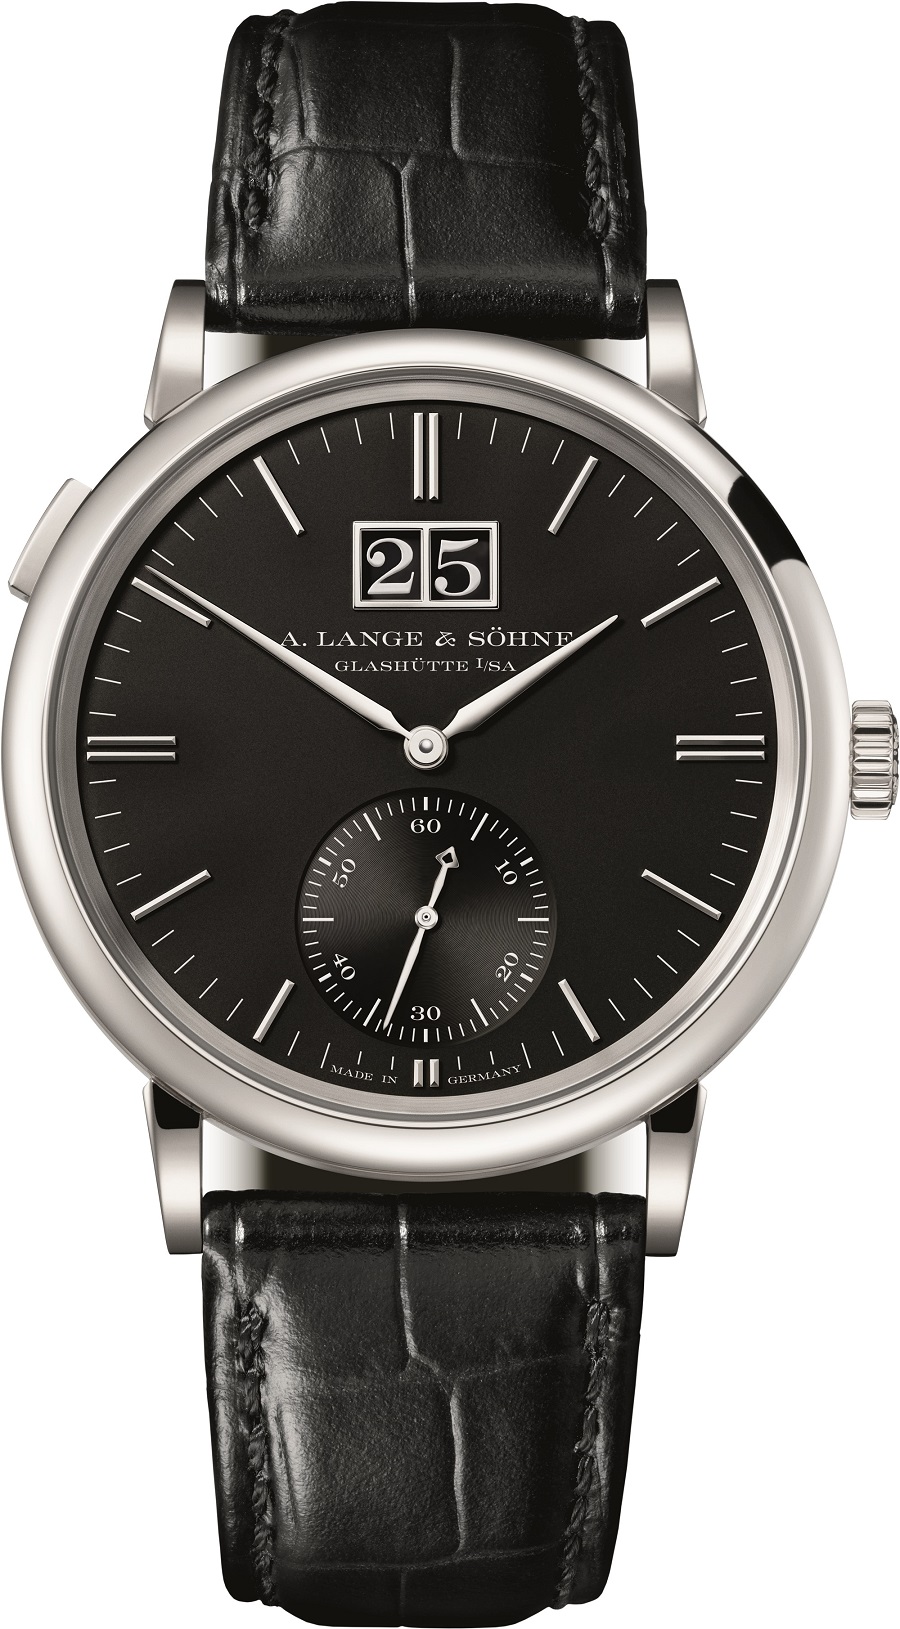 ALS Saxonia Outsize Date WG